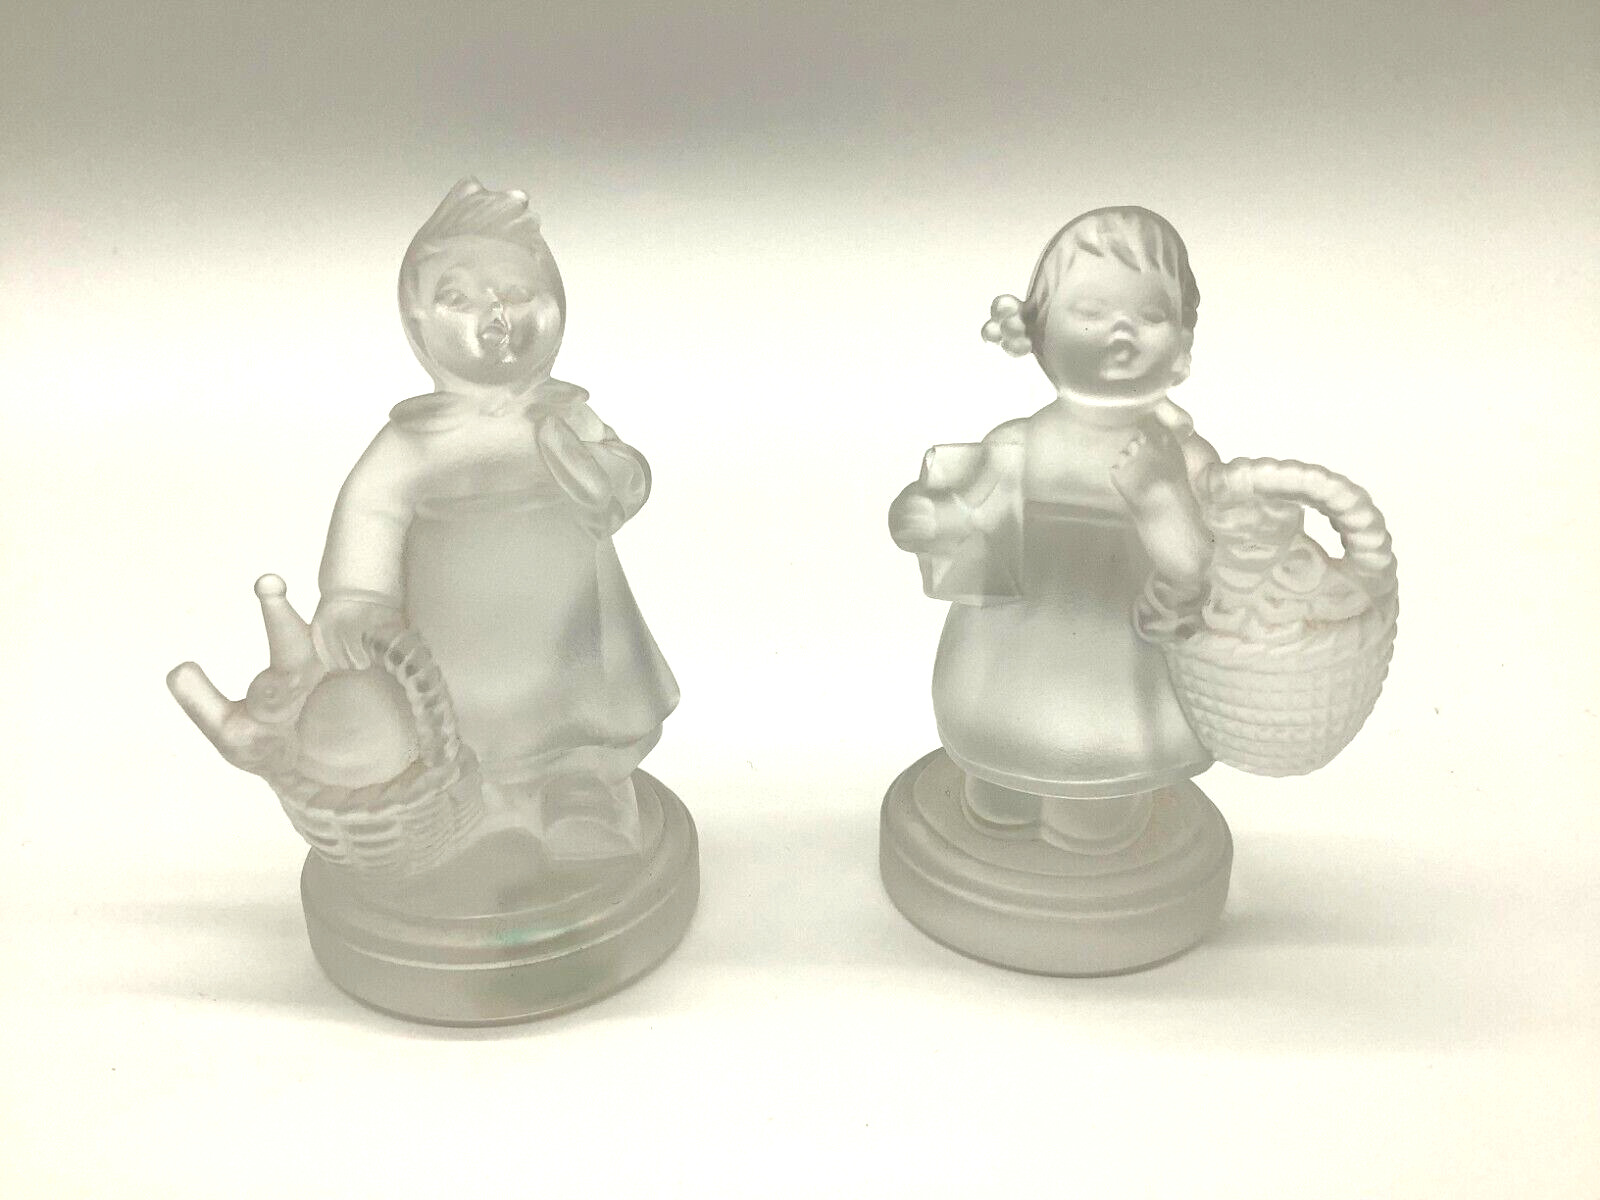 Hummel Goebel Crystal Collection Figurines 1990 Germany - Two Girls With Baskets